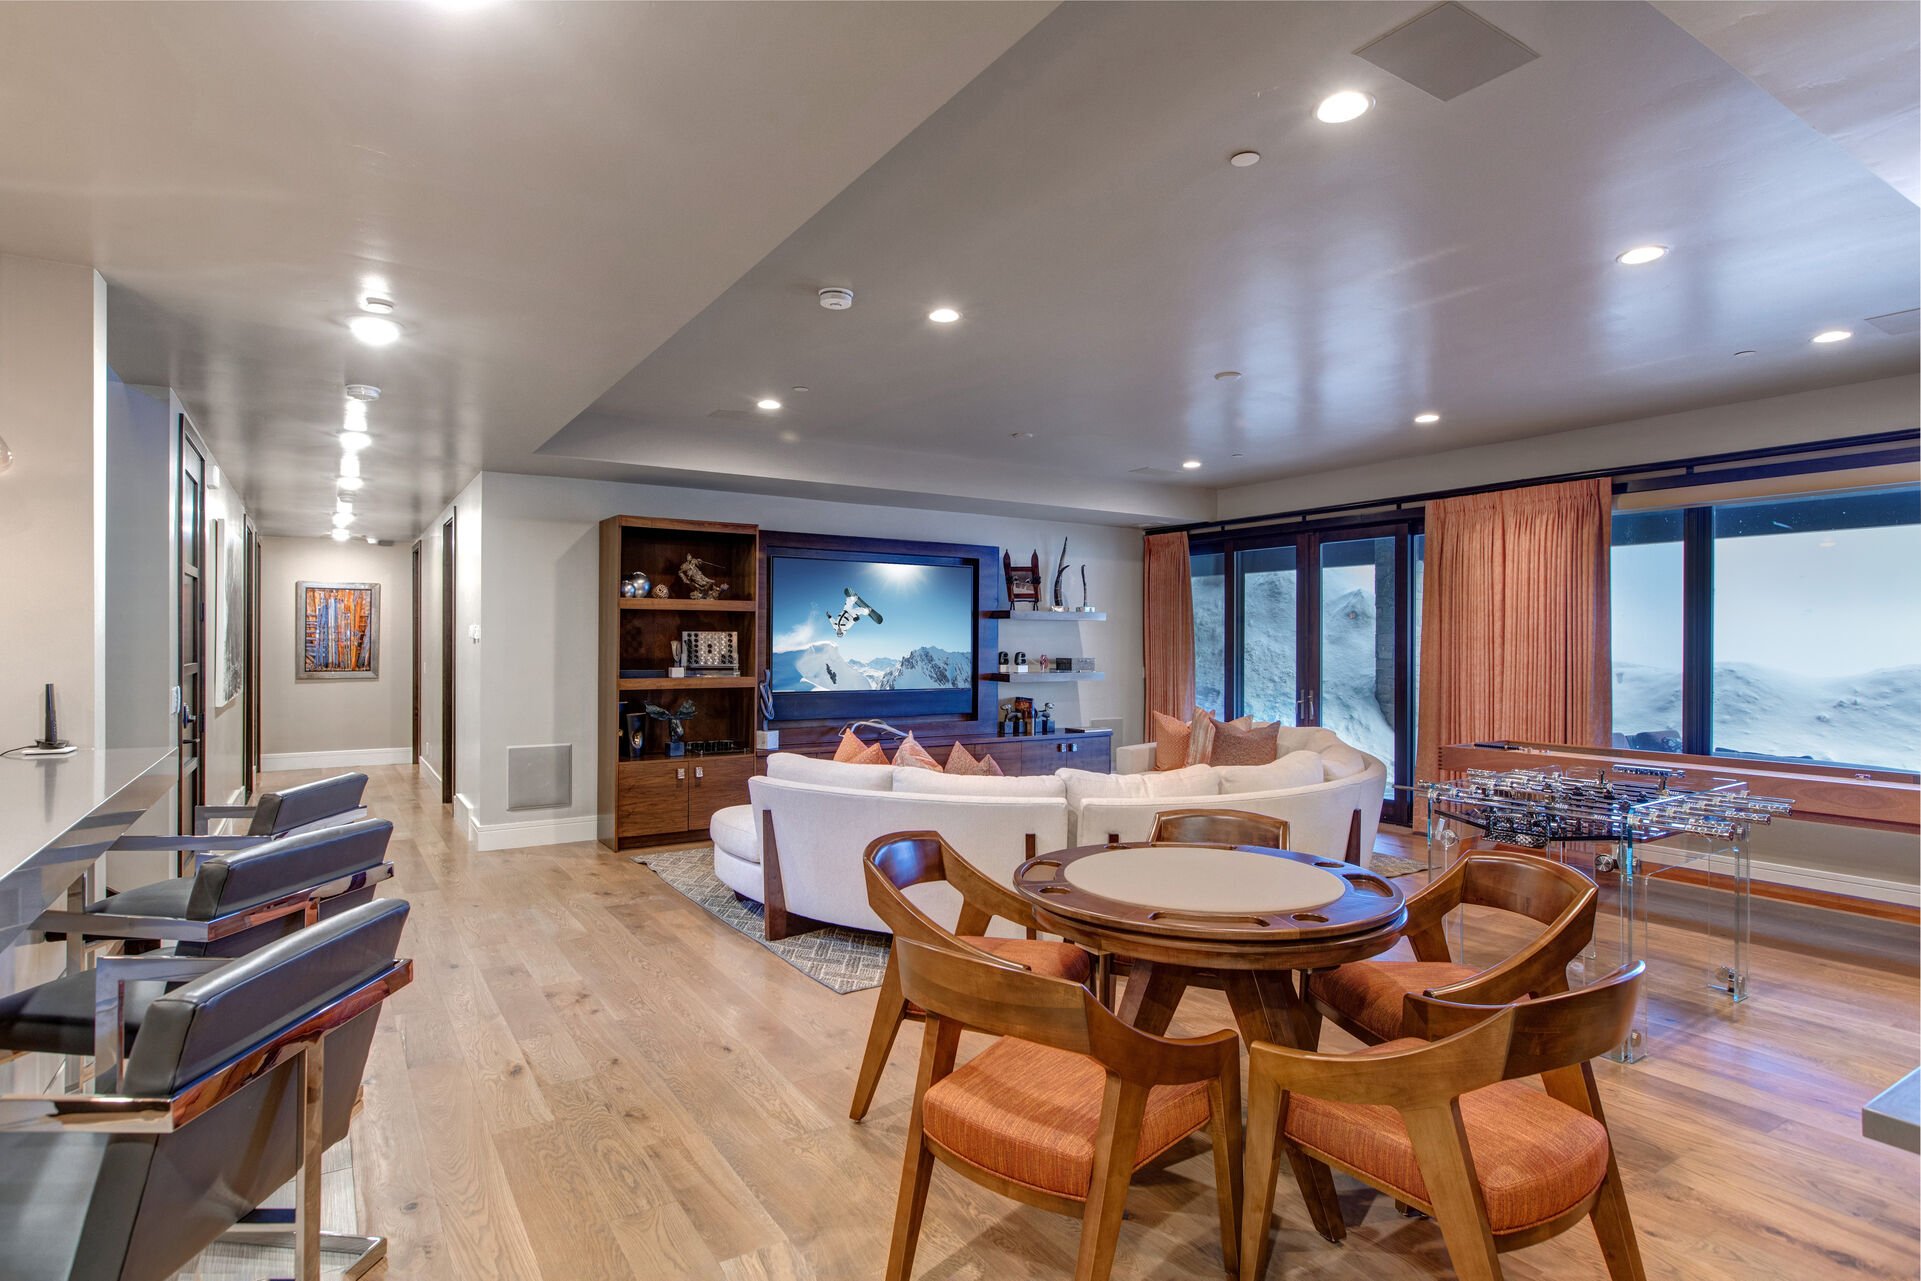 Great Gathering and Entertaining Space with Beautiful Radiant Heat Hardwood Flooring